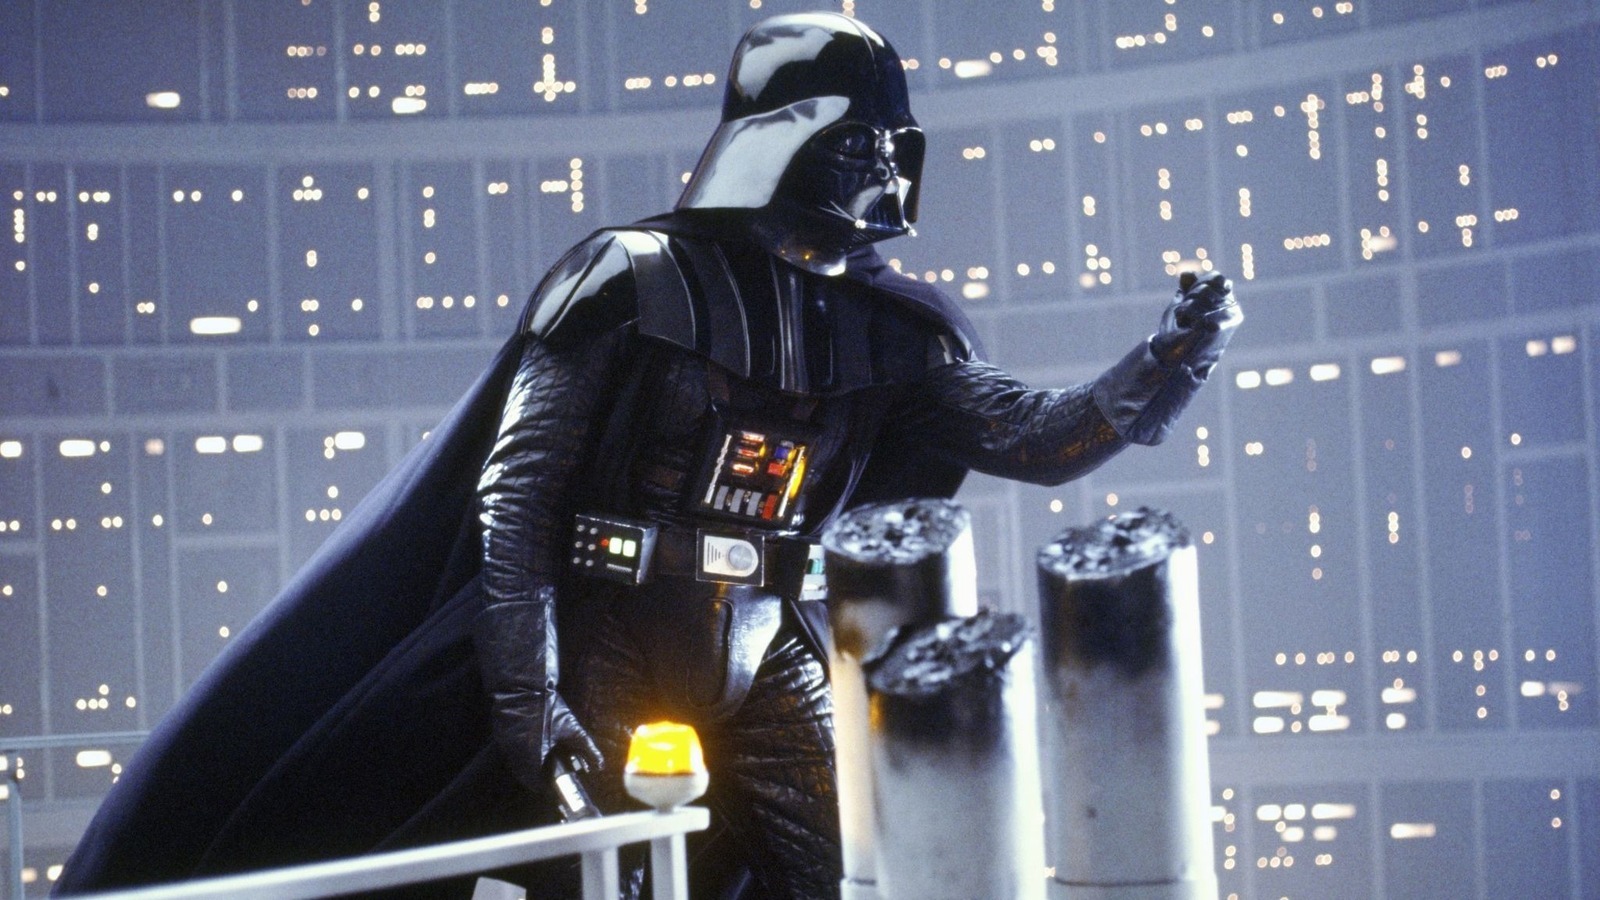 who played Darth Vader in star wars